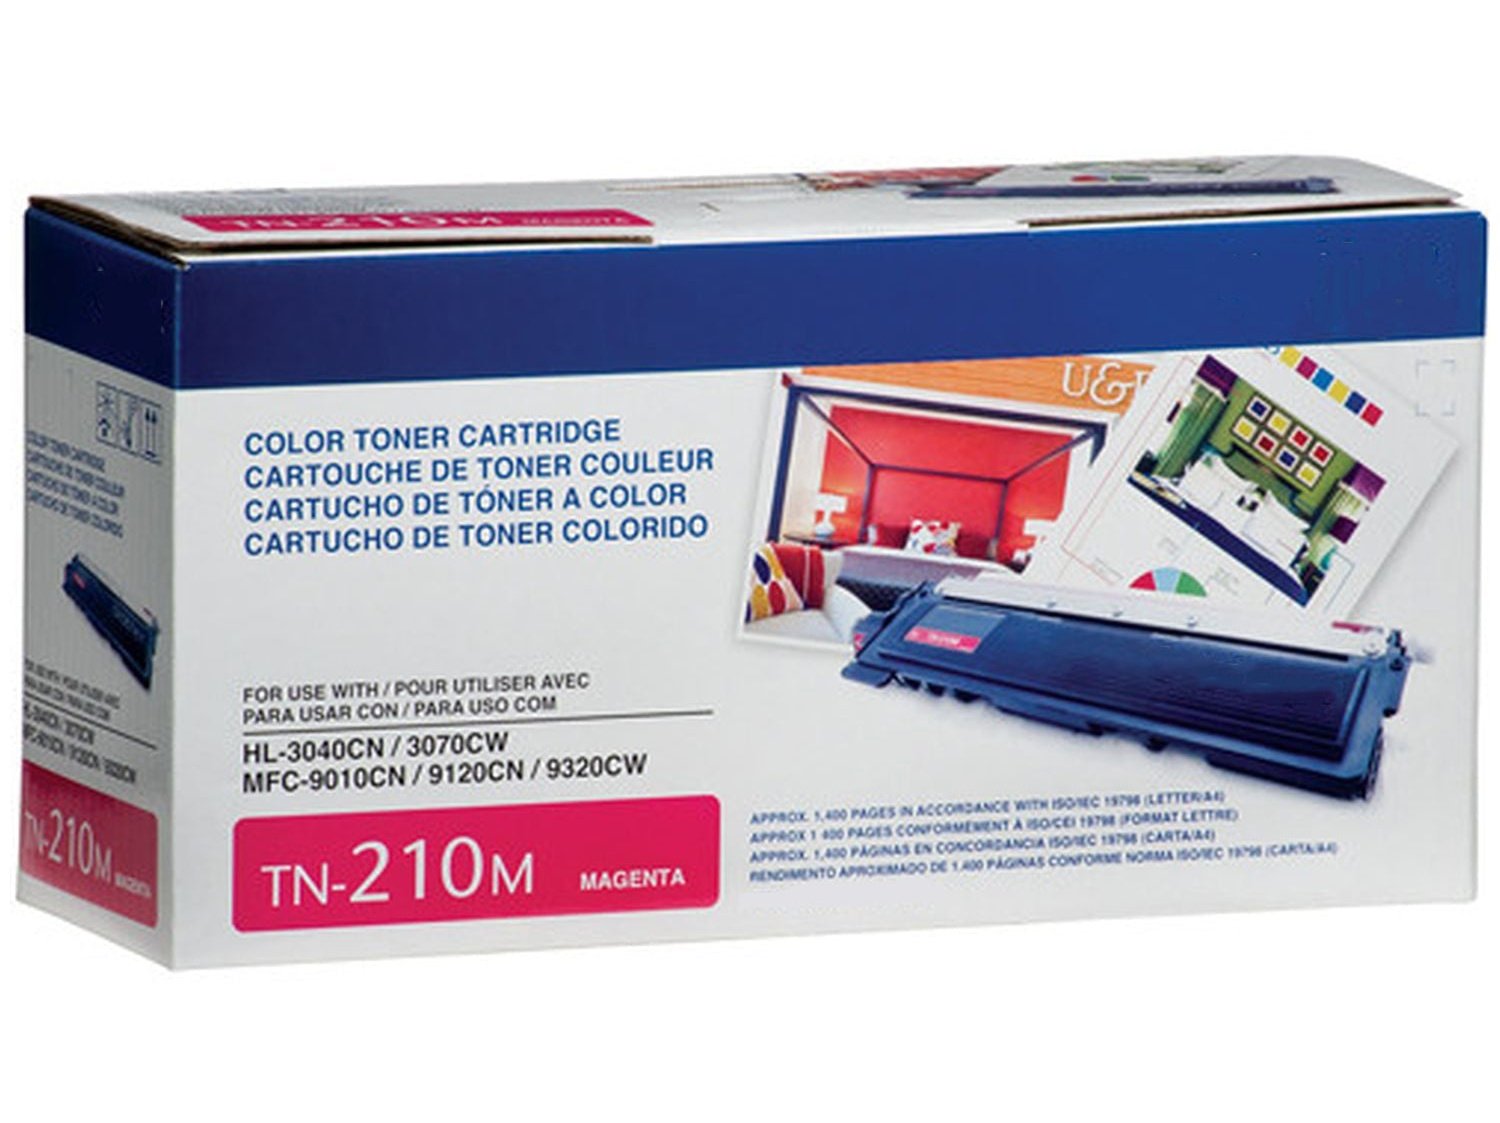 ICU Compatible/ OEM Get Brother ICU-TN-210-M Yields 1400 Pages TN-210 Magenta Standard Yield 1400 Pages Toner Cartridge (TN210M) - Ink Cartridges USA